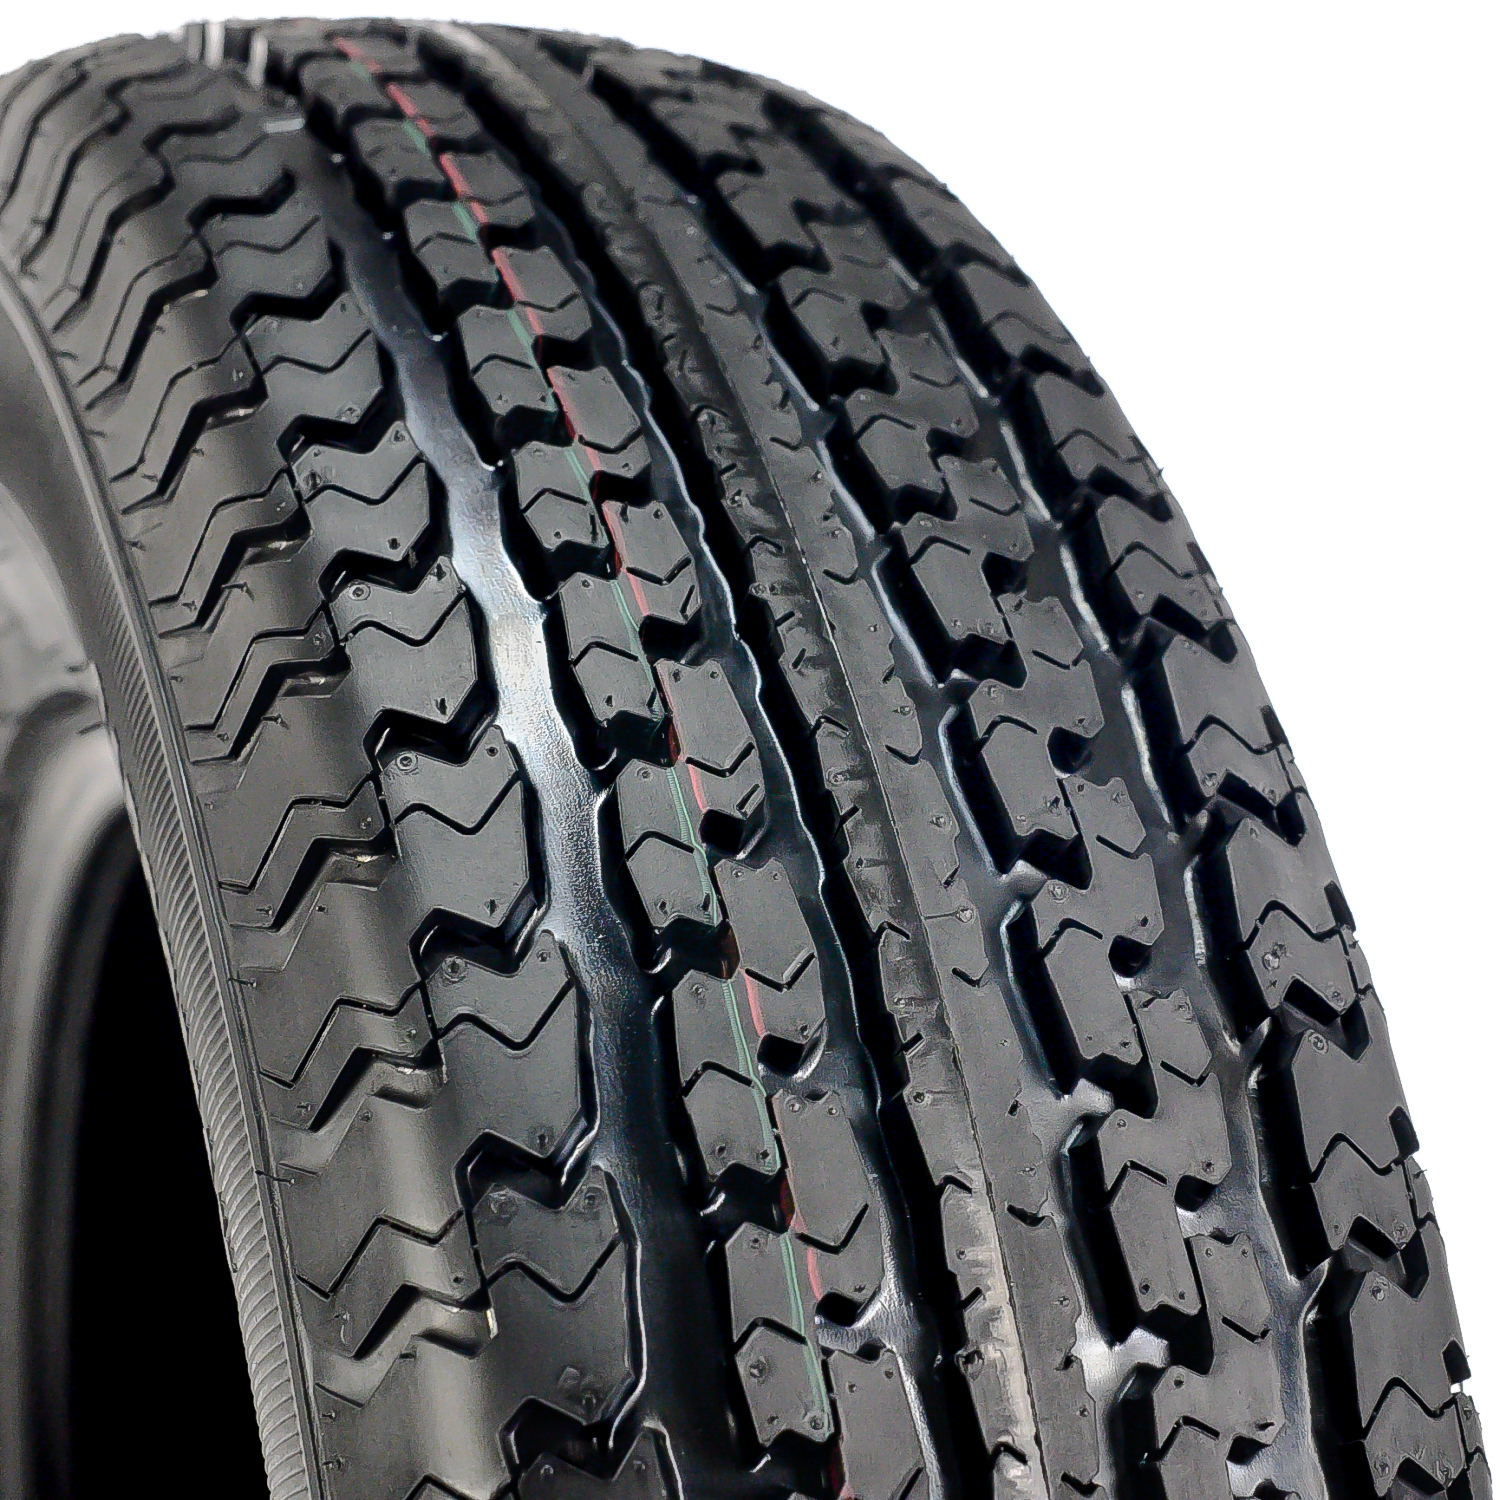 Mastertrack Tire Mastertrack UN-203 Steel Belted ST 225/75R15 113/108Q D 8 Ply Trailer